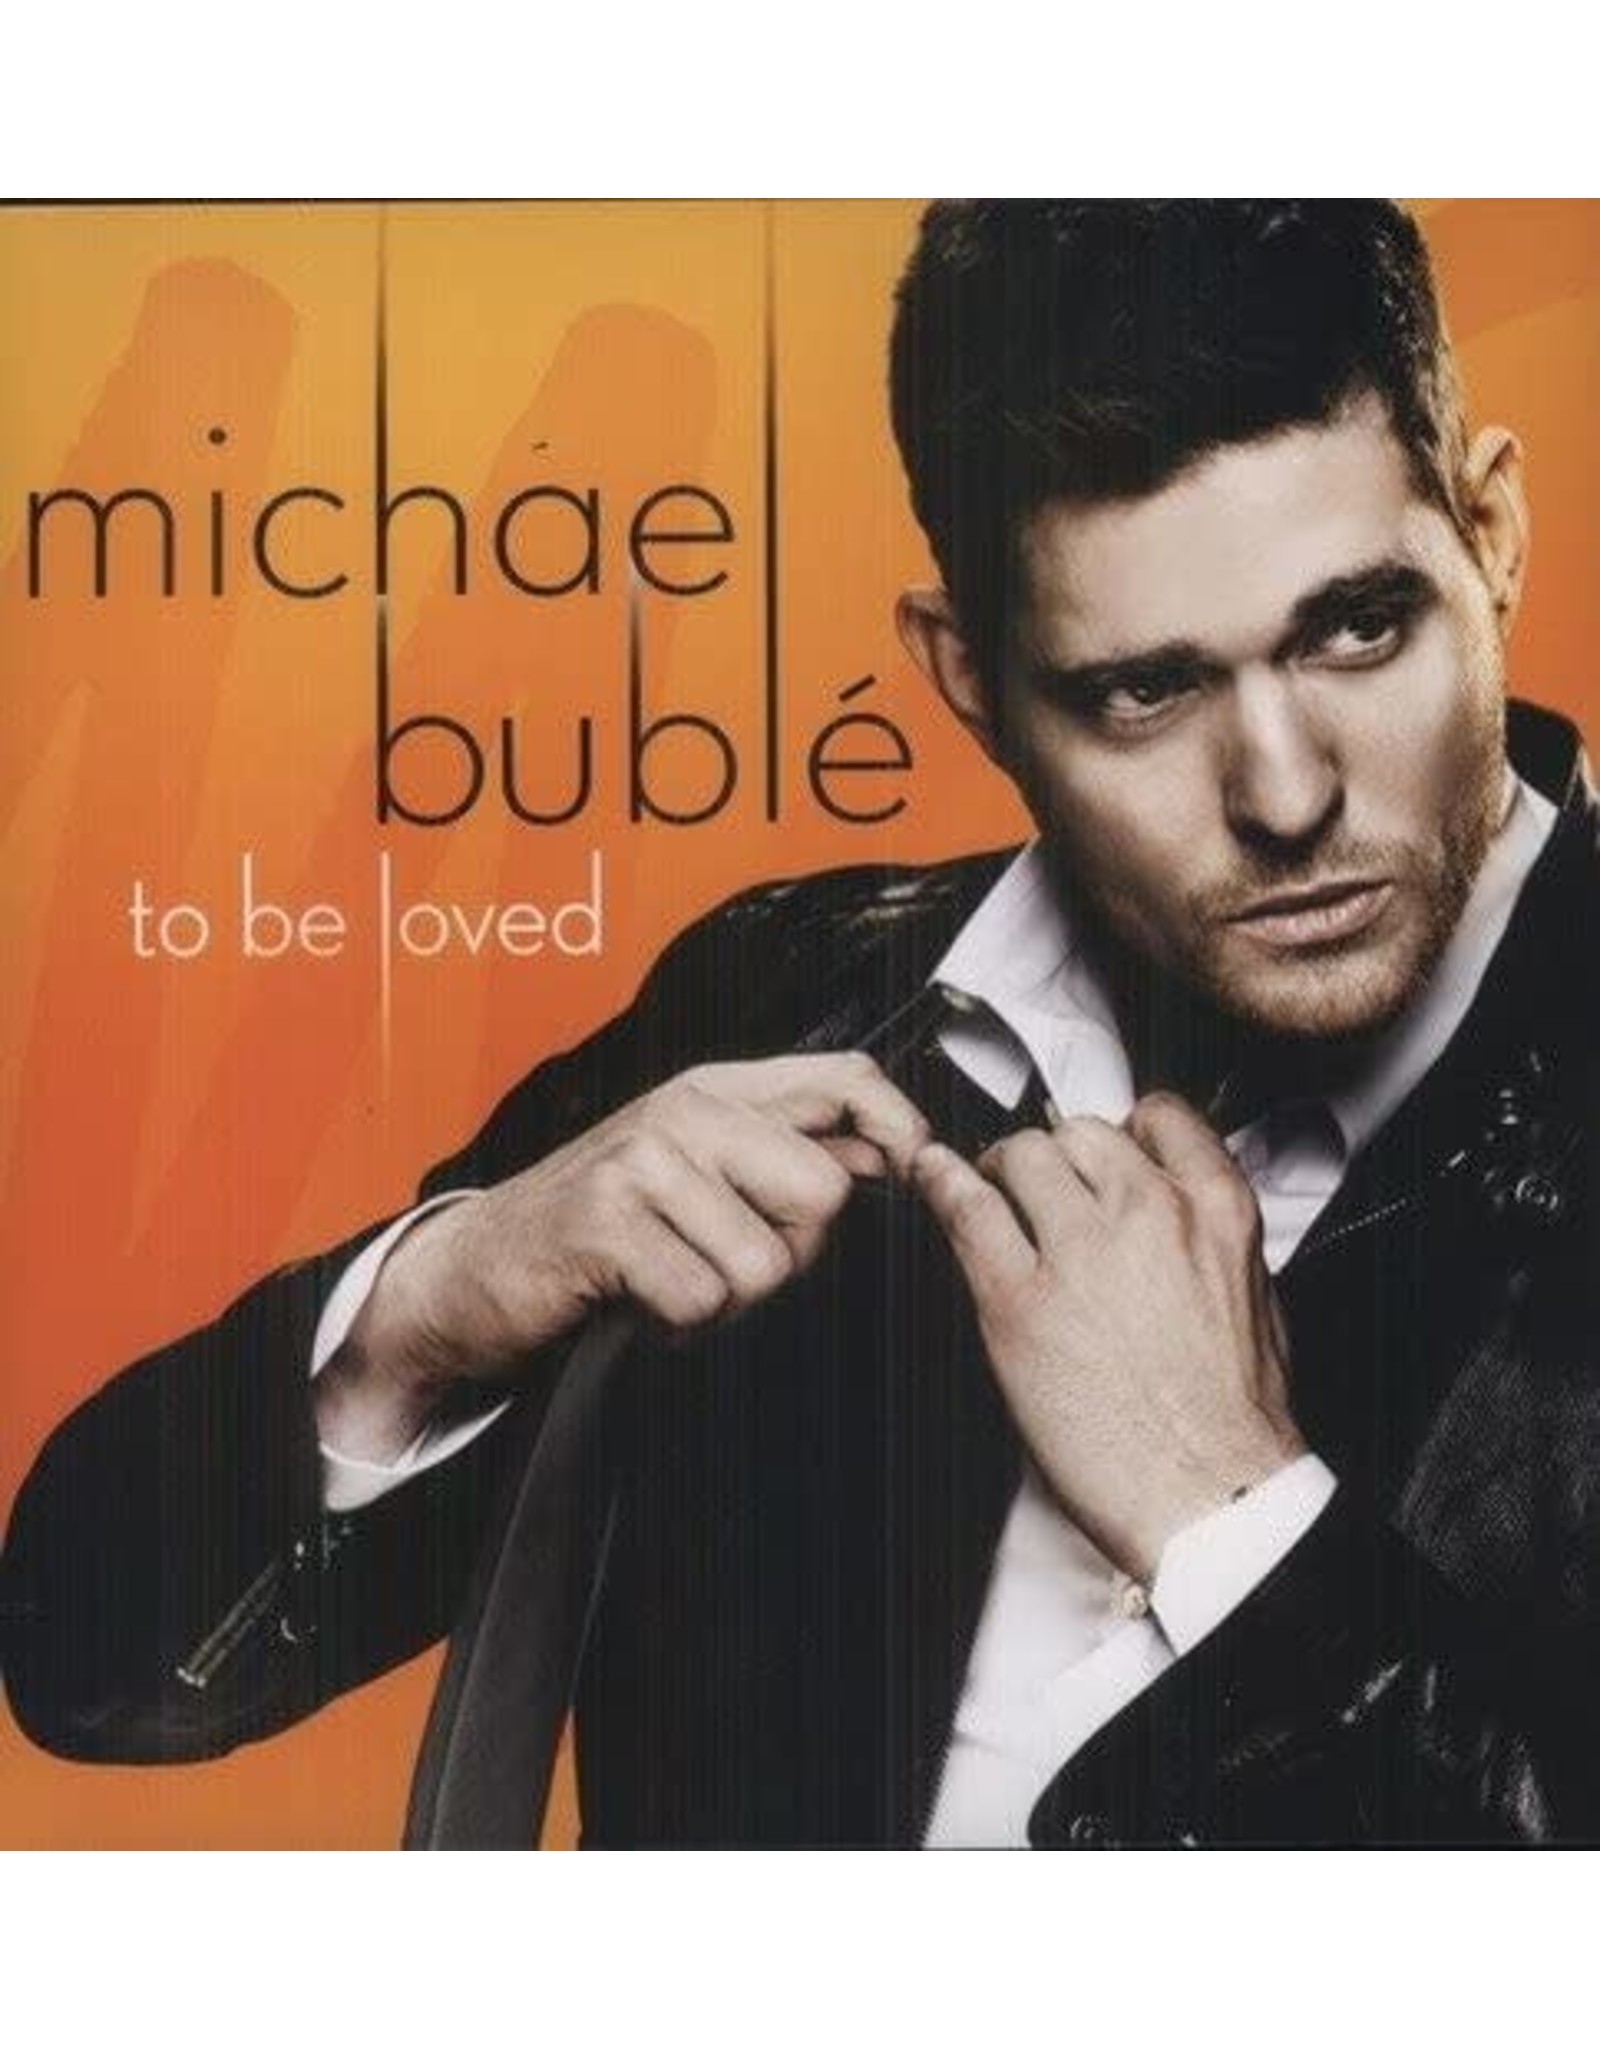 Michael Buble - To Be Loved